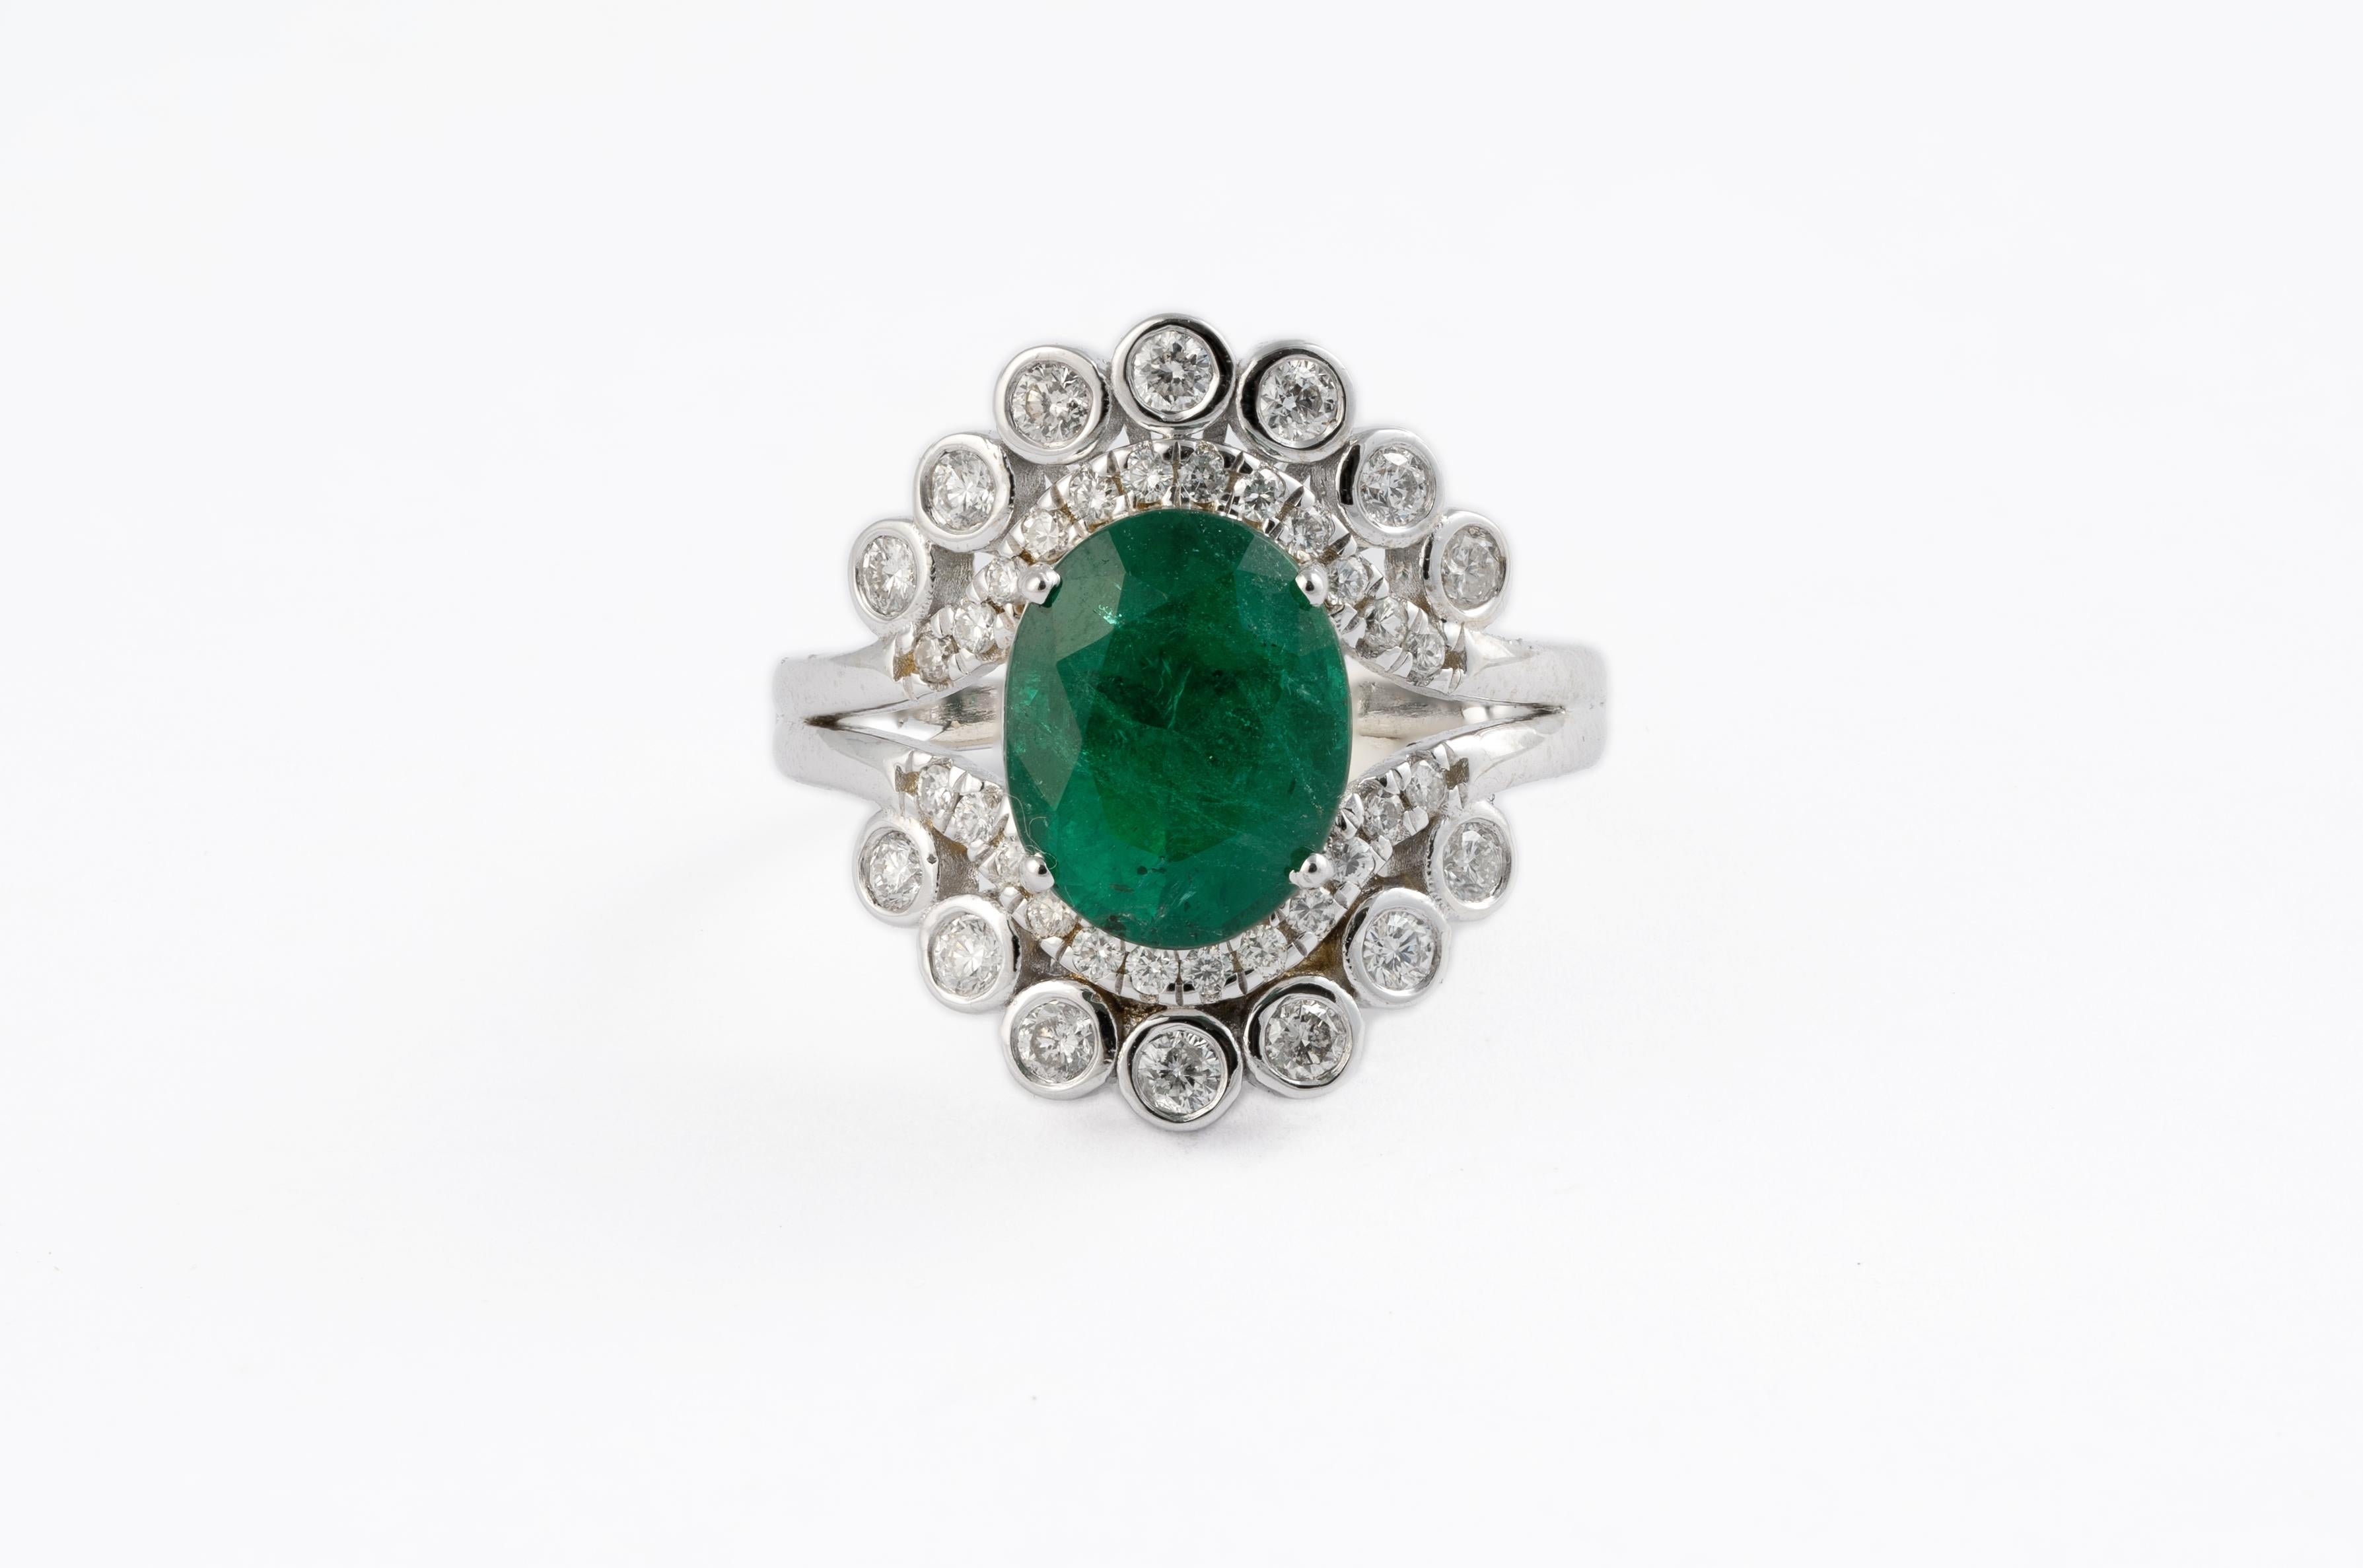 This is an amazing everyday wear ring with high quality Zambian natural emerald and very good 
clarity diamonds which are vsi in clarity and G colour 
emeralds: 2.96cts
diamonds :0.65cts
gold : 5.88gms
very hard to capture the true color and luster